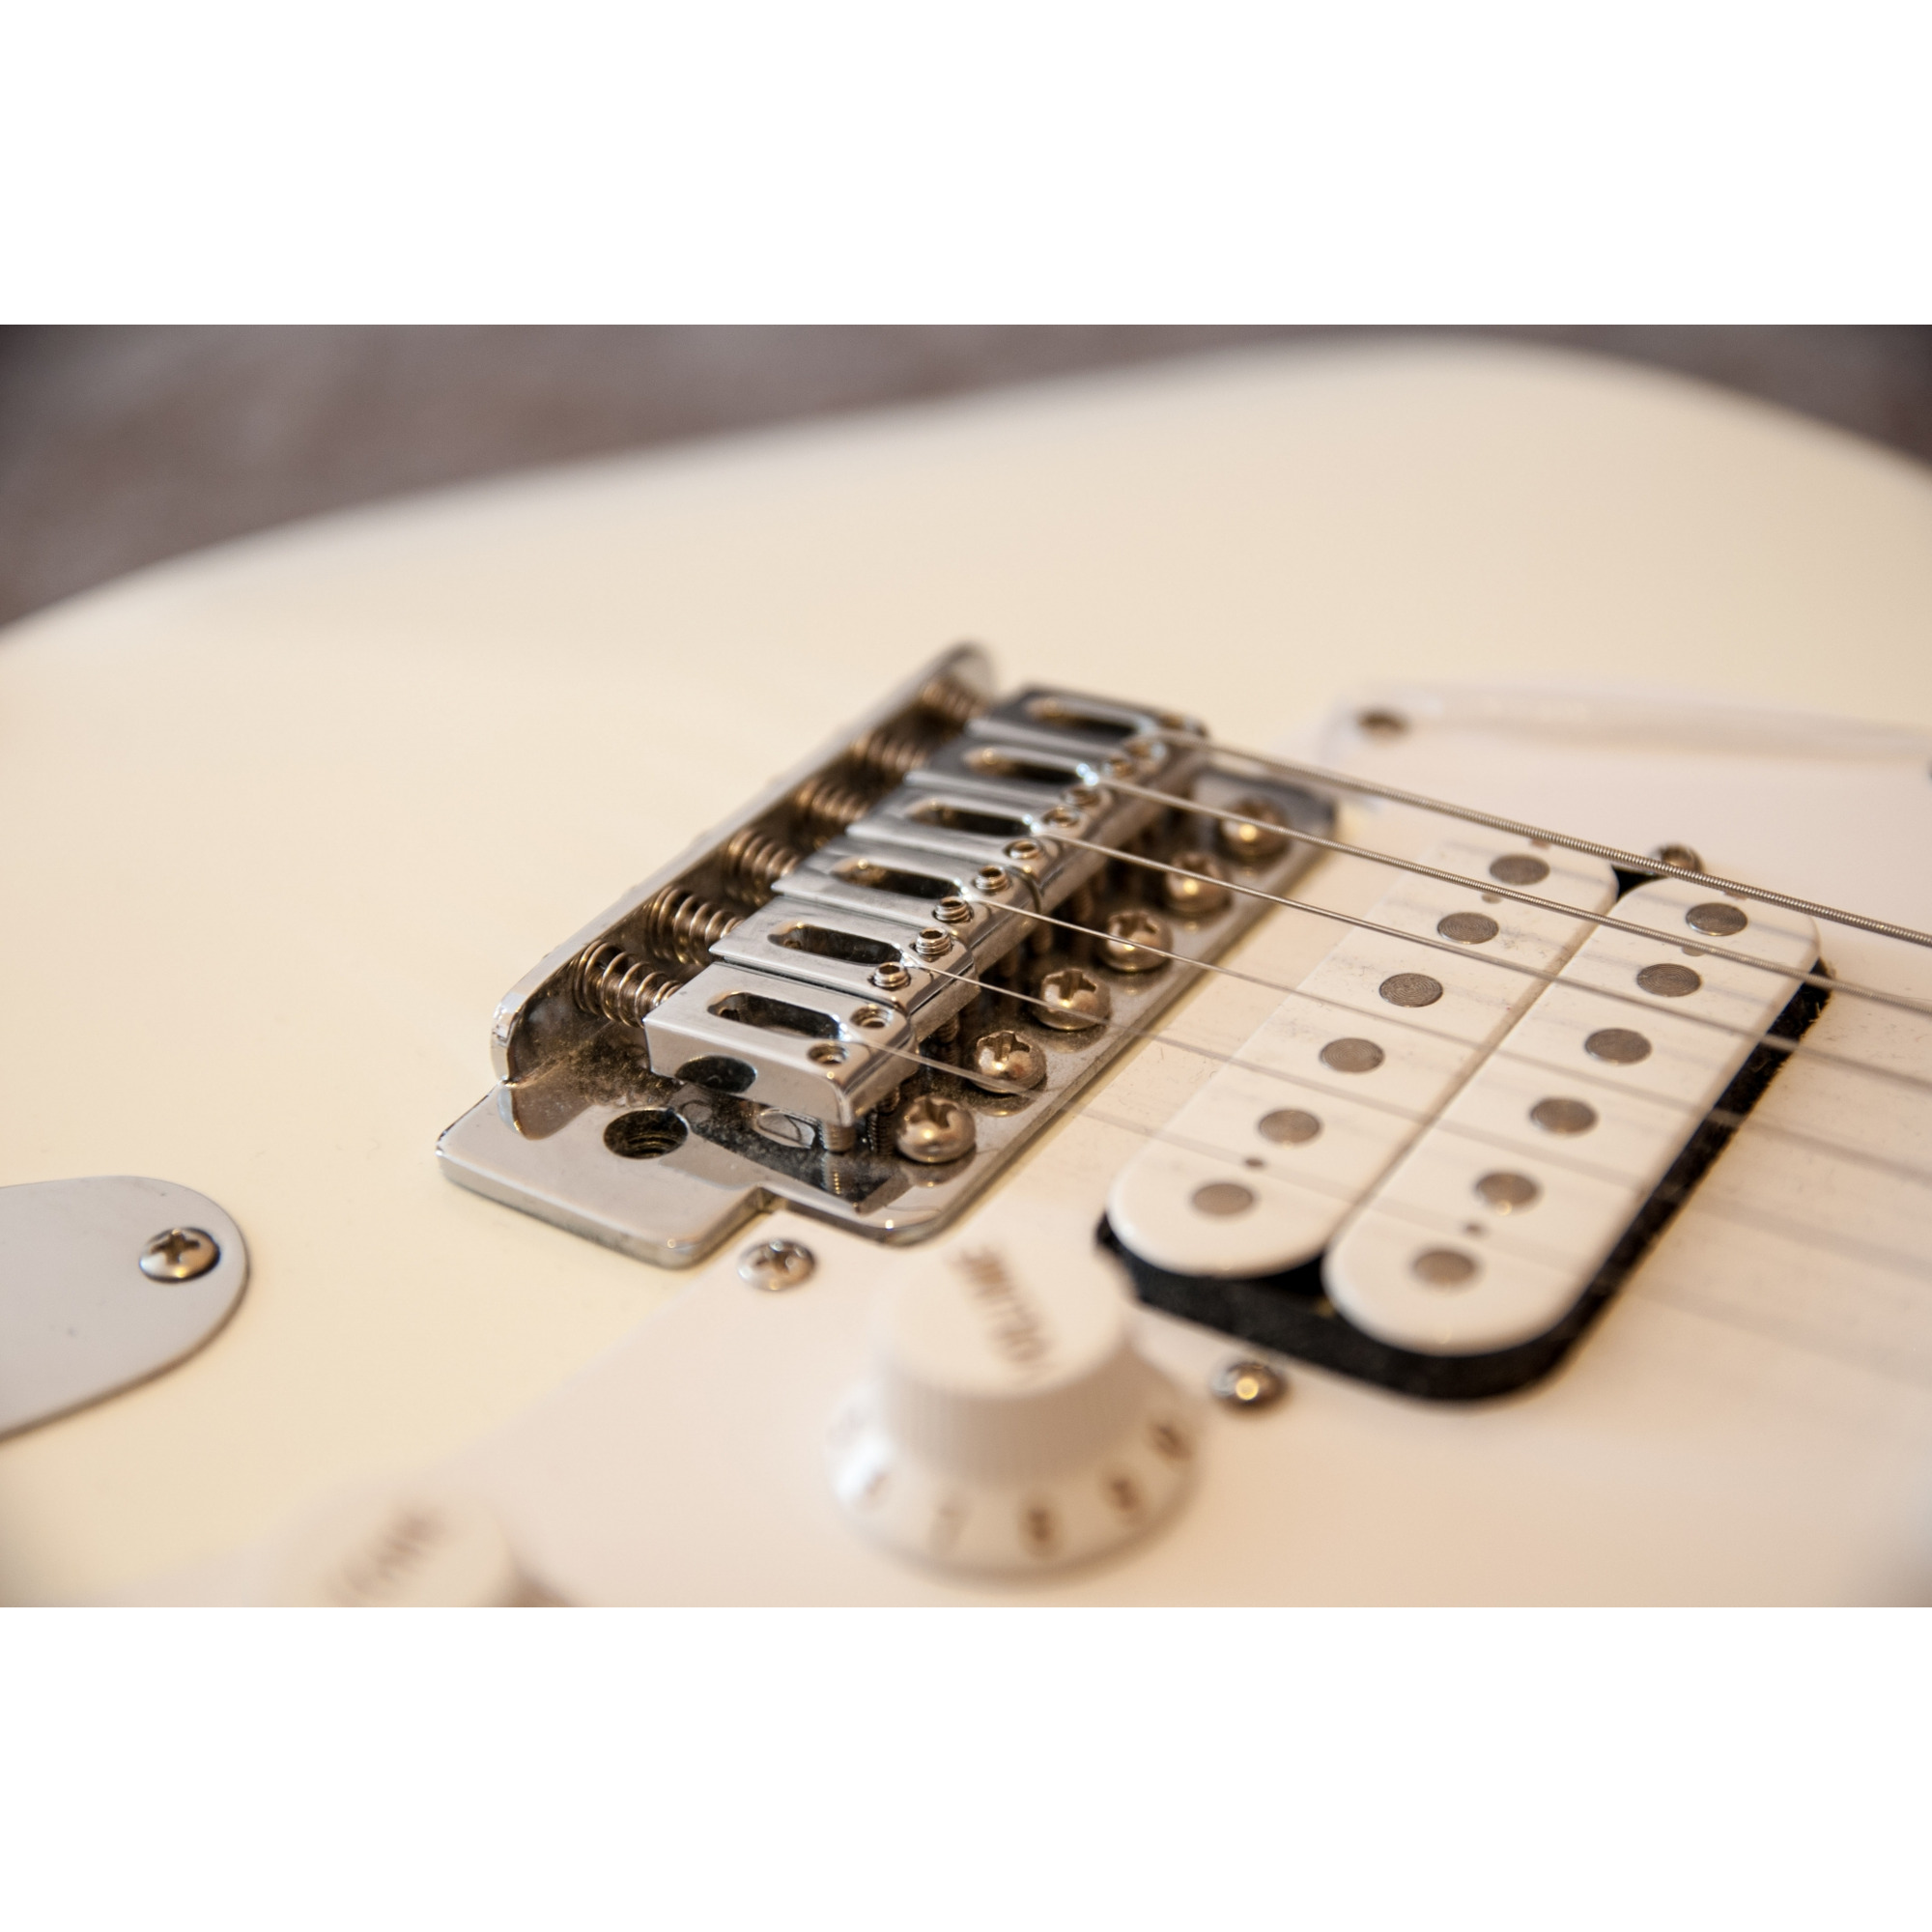 Bullet stratocaster hss. Электрогитара Squier Bullet Stratocaster with Tremolo. Электрогитара Squier Bullet Strat Tremolo HSS Arctic White. Squier Bullet Stratocaster HSS Tremolo Arctic White. Электрогитара Squier Bullet Strat Tremolo HSS.